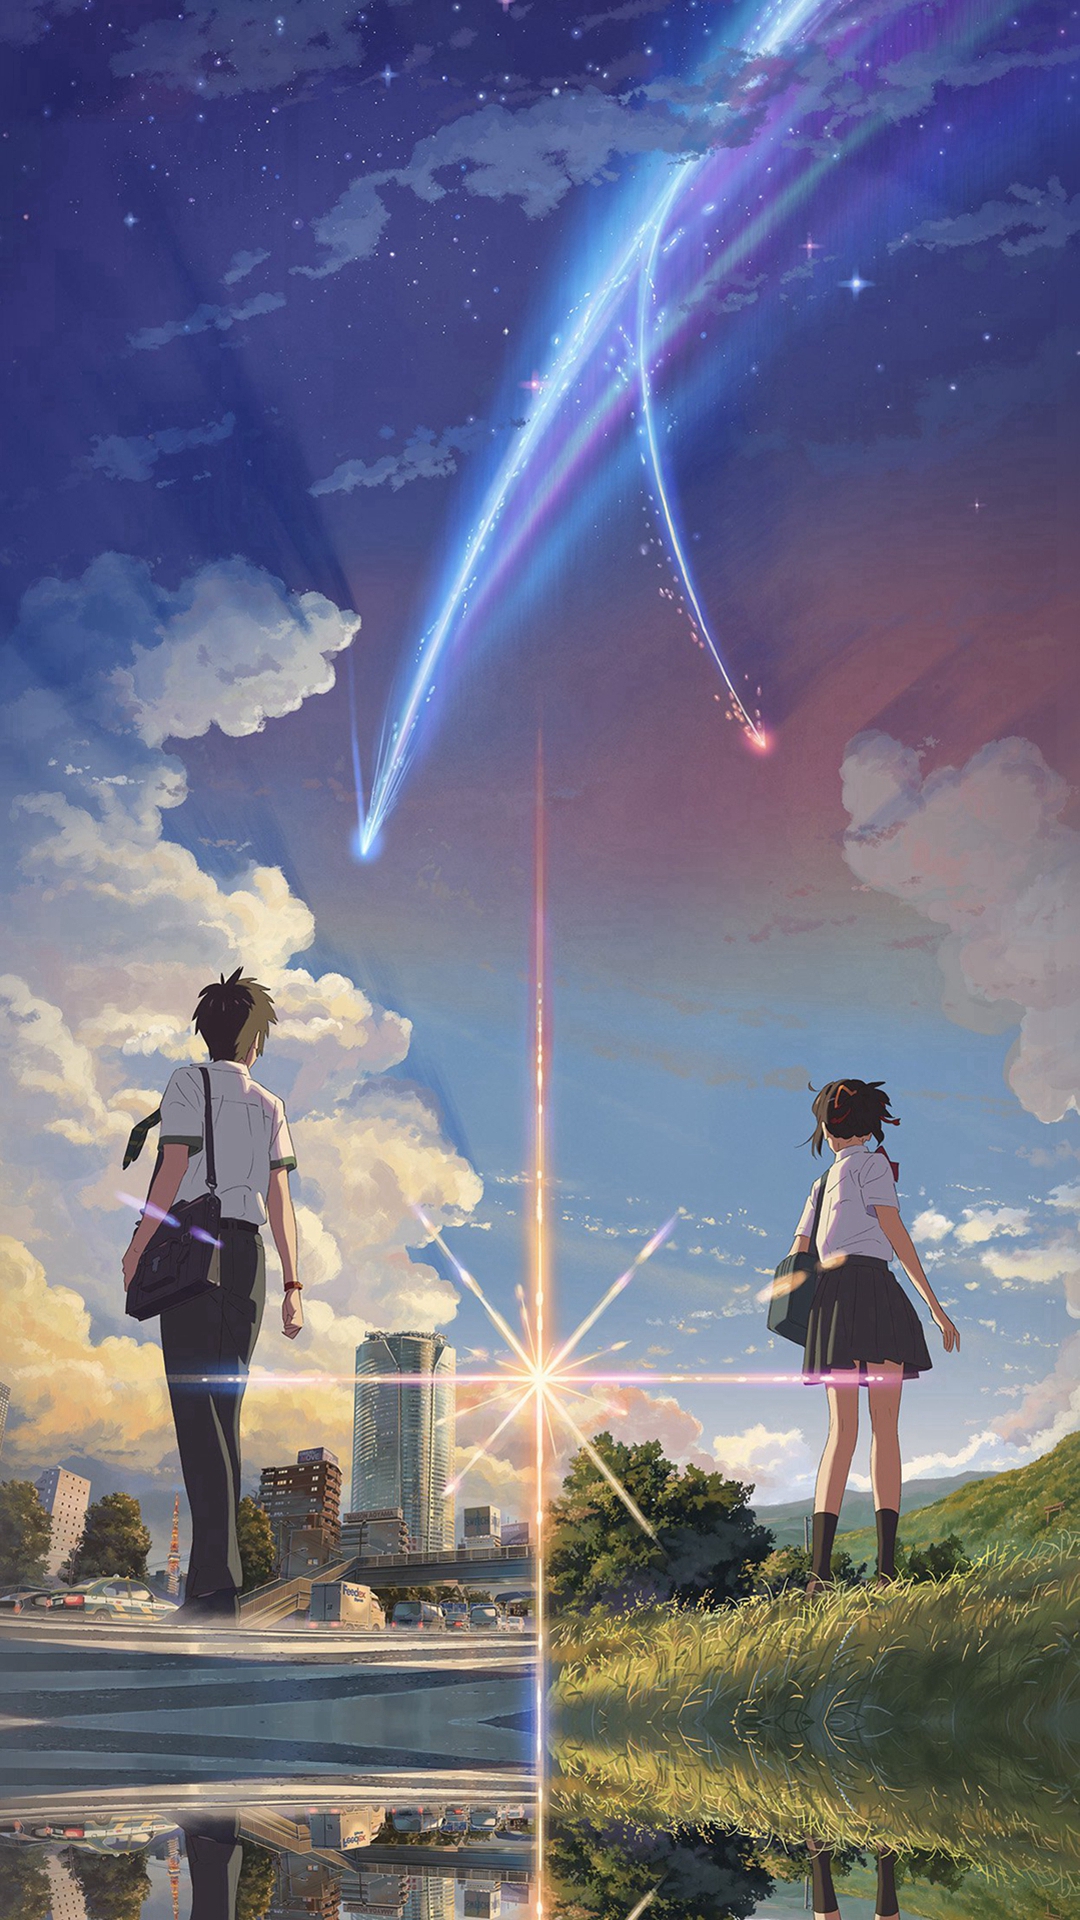 Your Name Movie Wallpaper Hd - HD Wallpaper 